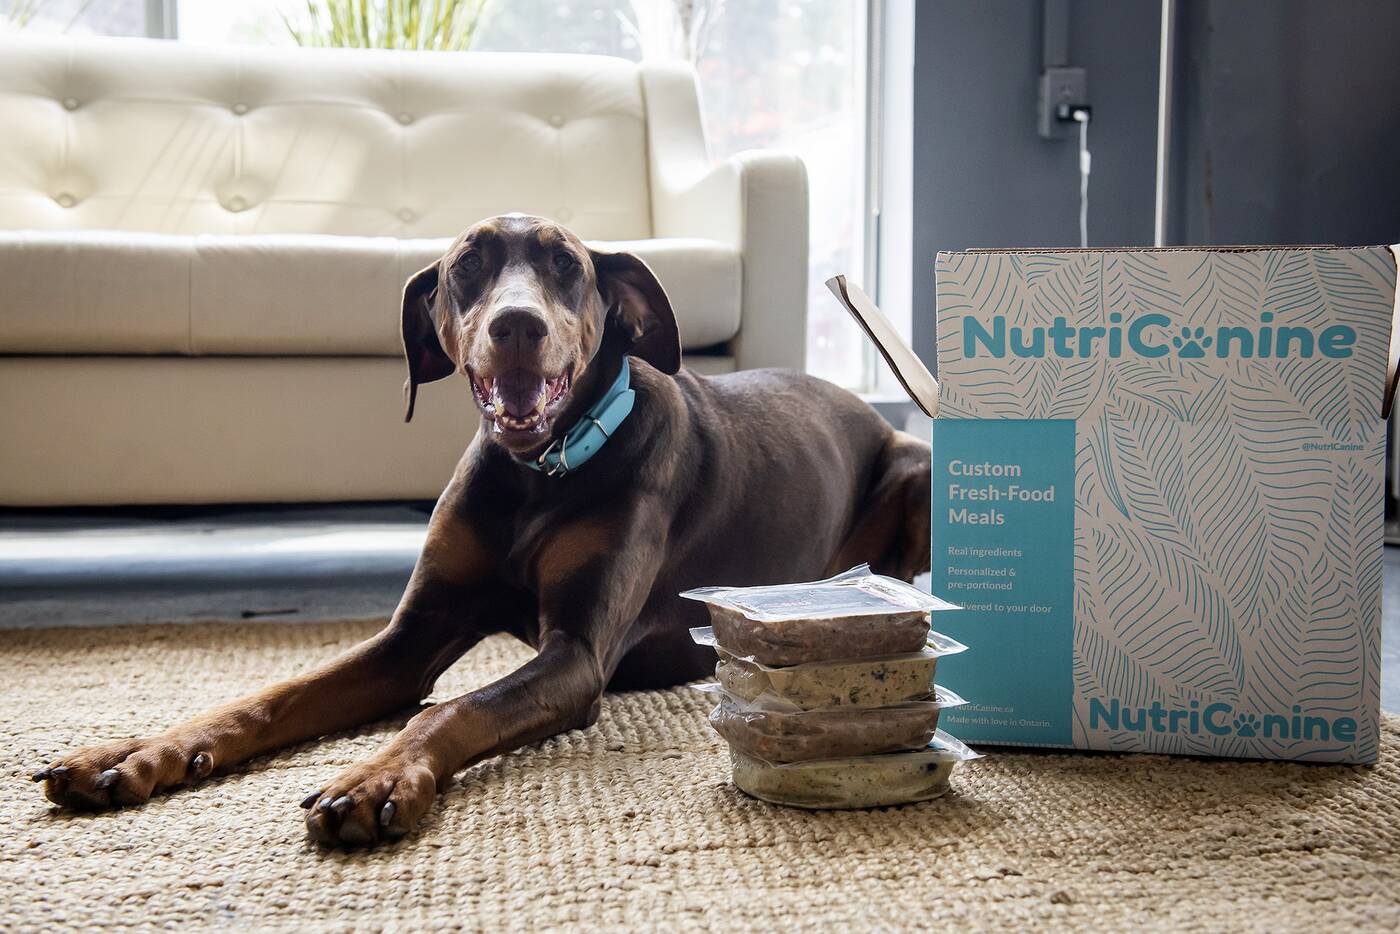 NutriCanine is giving away free samples on one day only